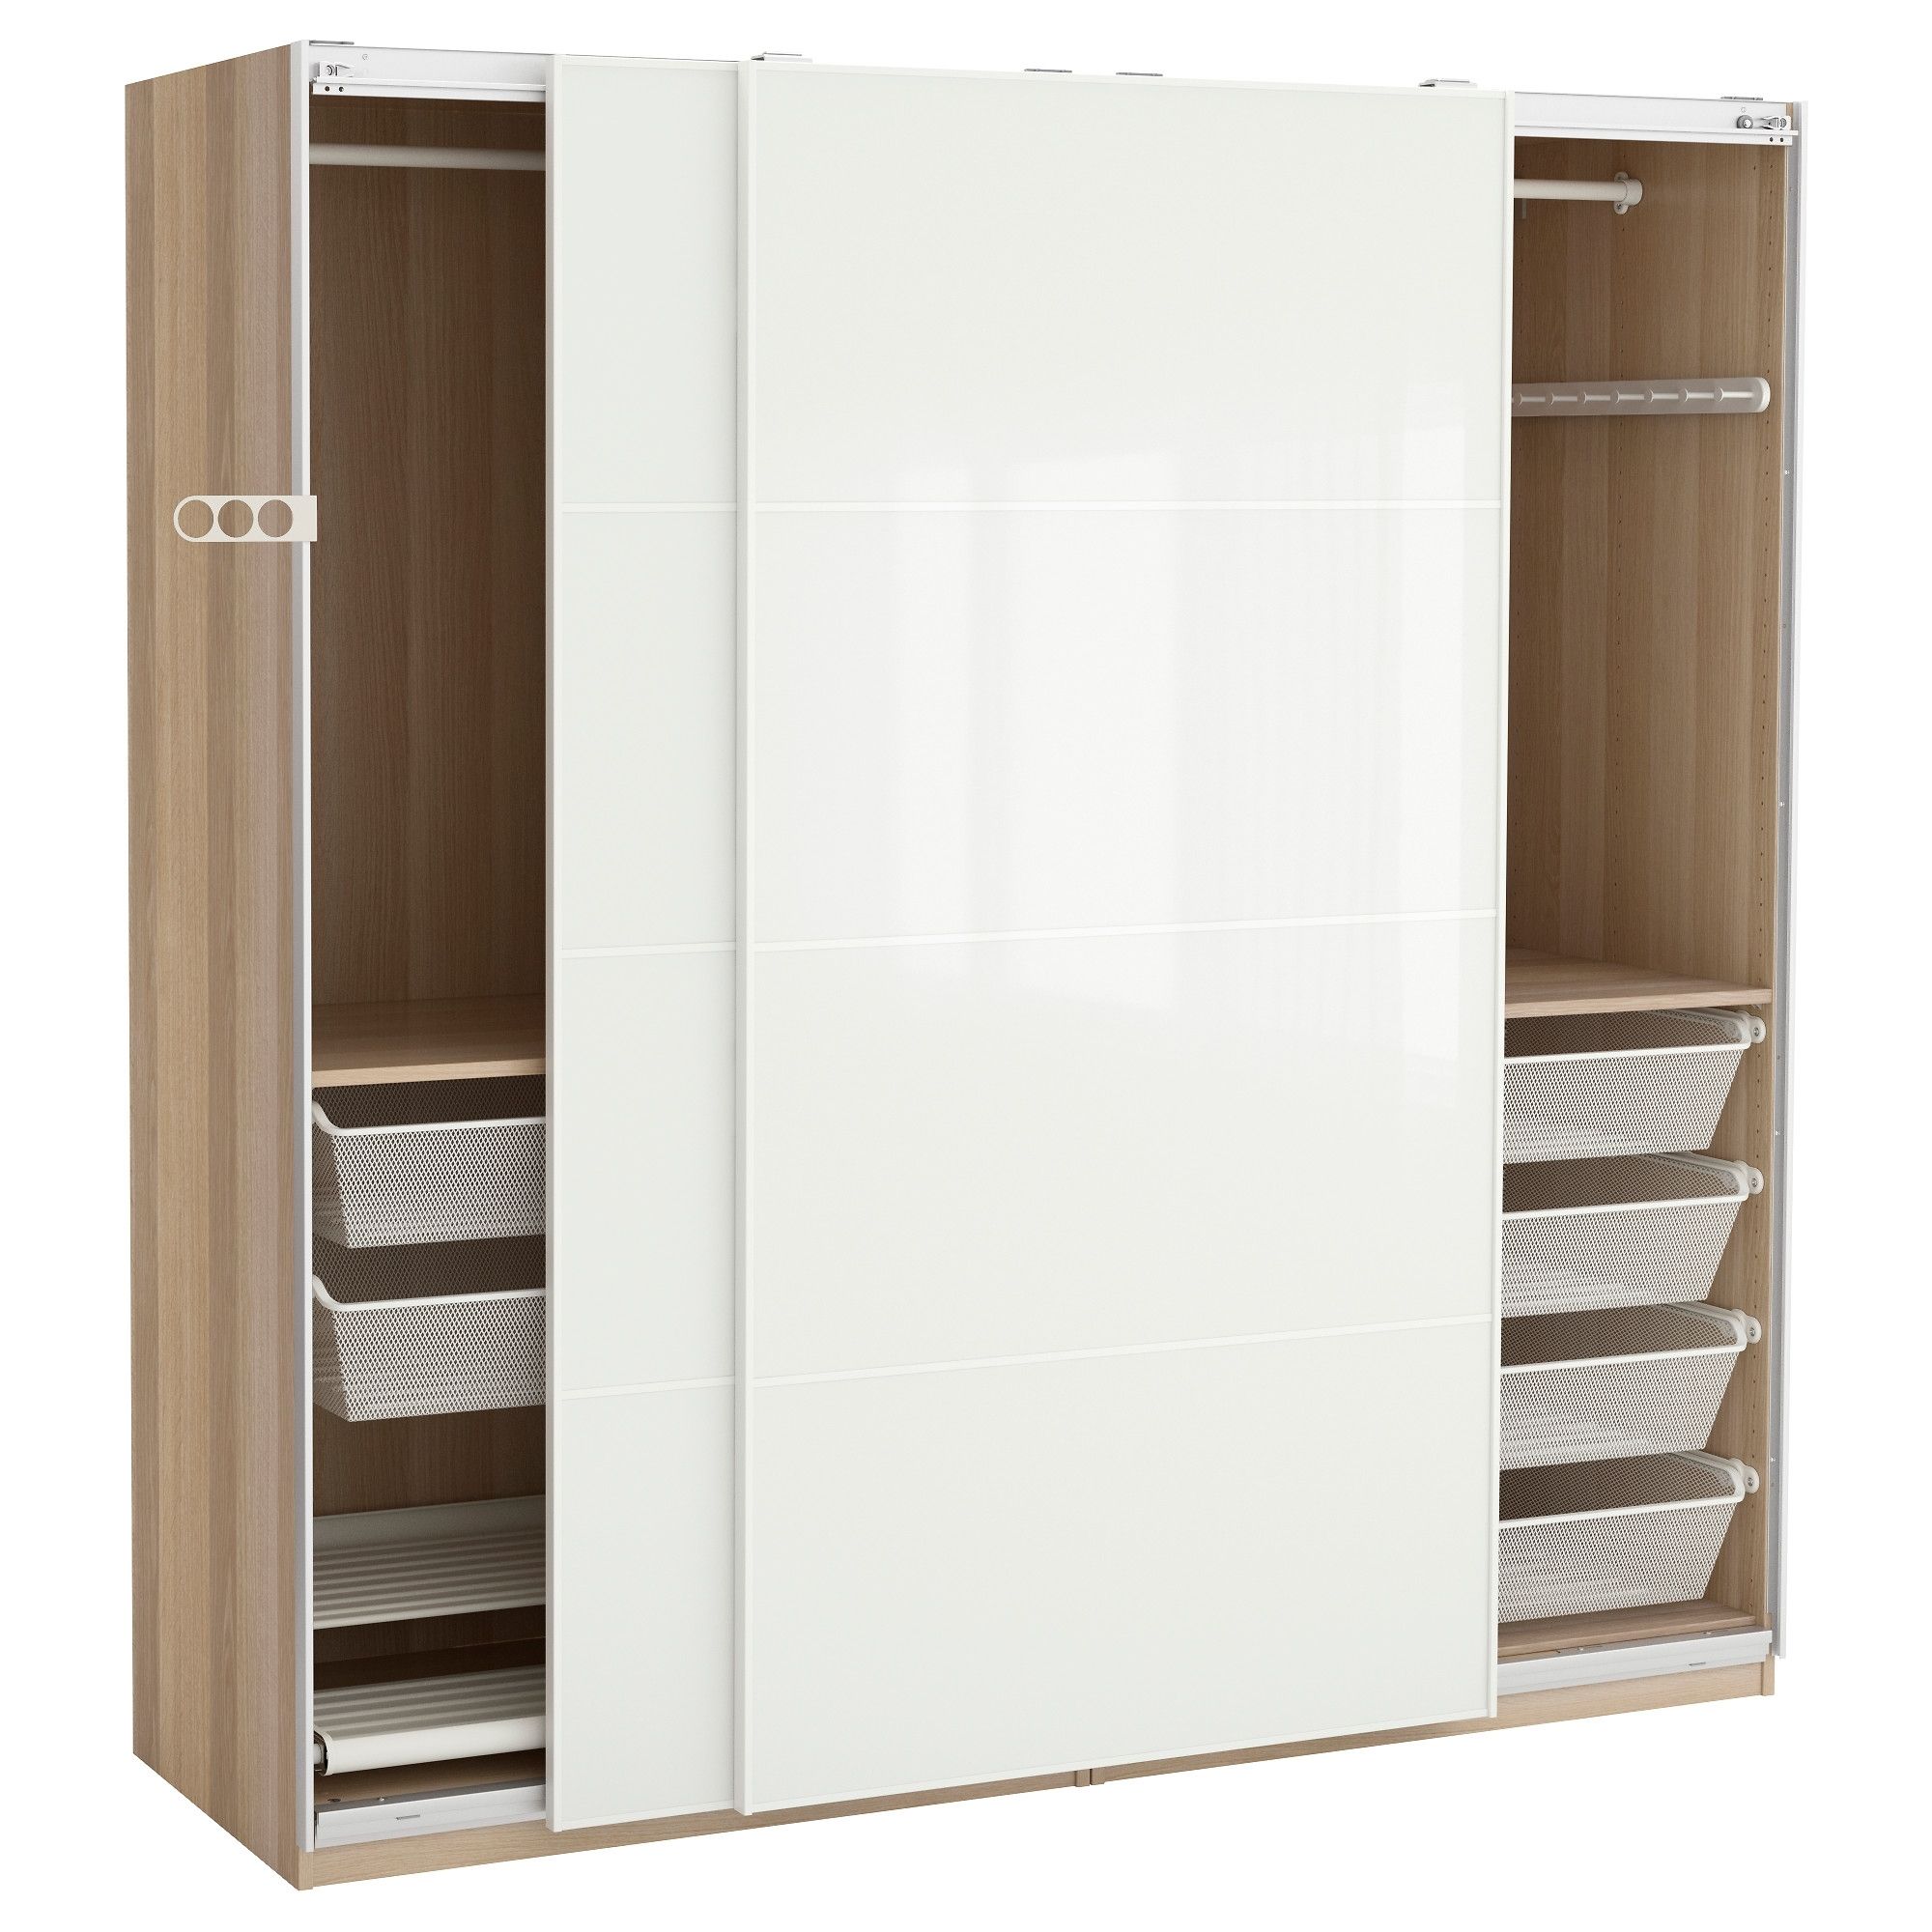 Ready Made Beech Wardrobes Price Tesco Singapore Uk In Many Type Throughout Famous Cheap Double Wardrobes (View 11 of 15)